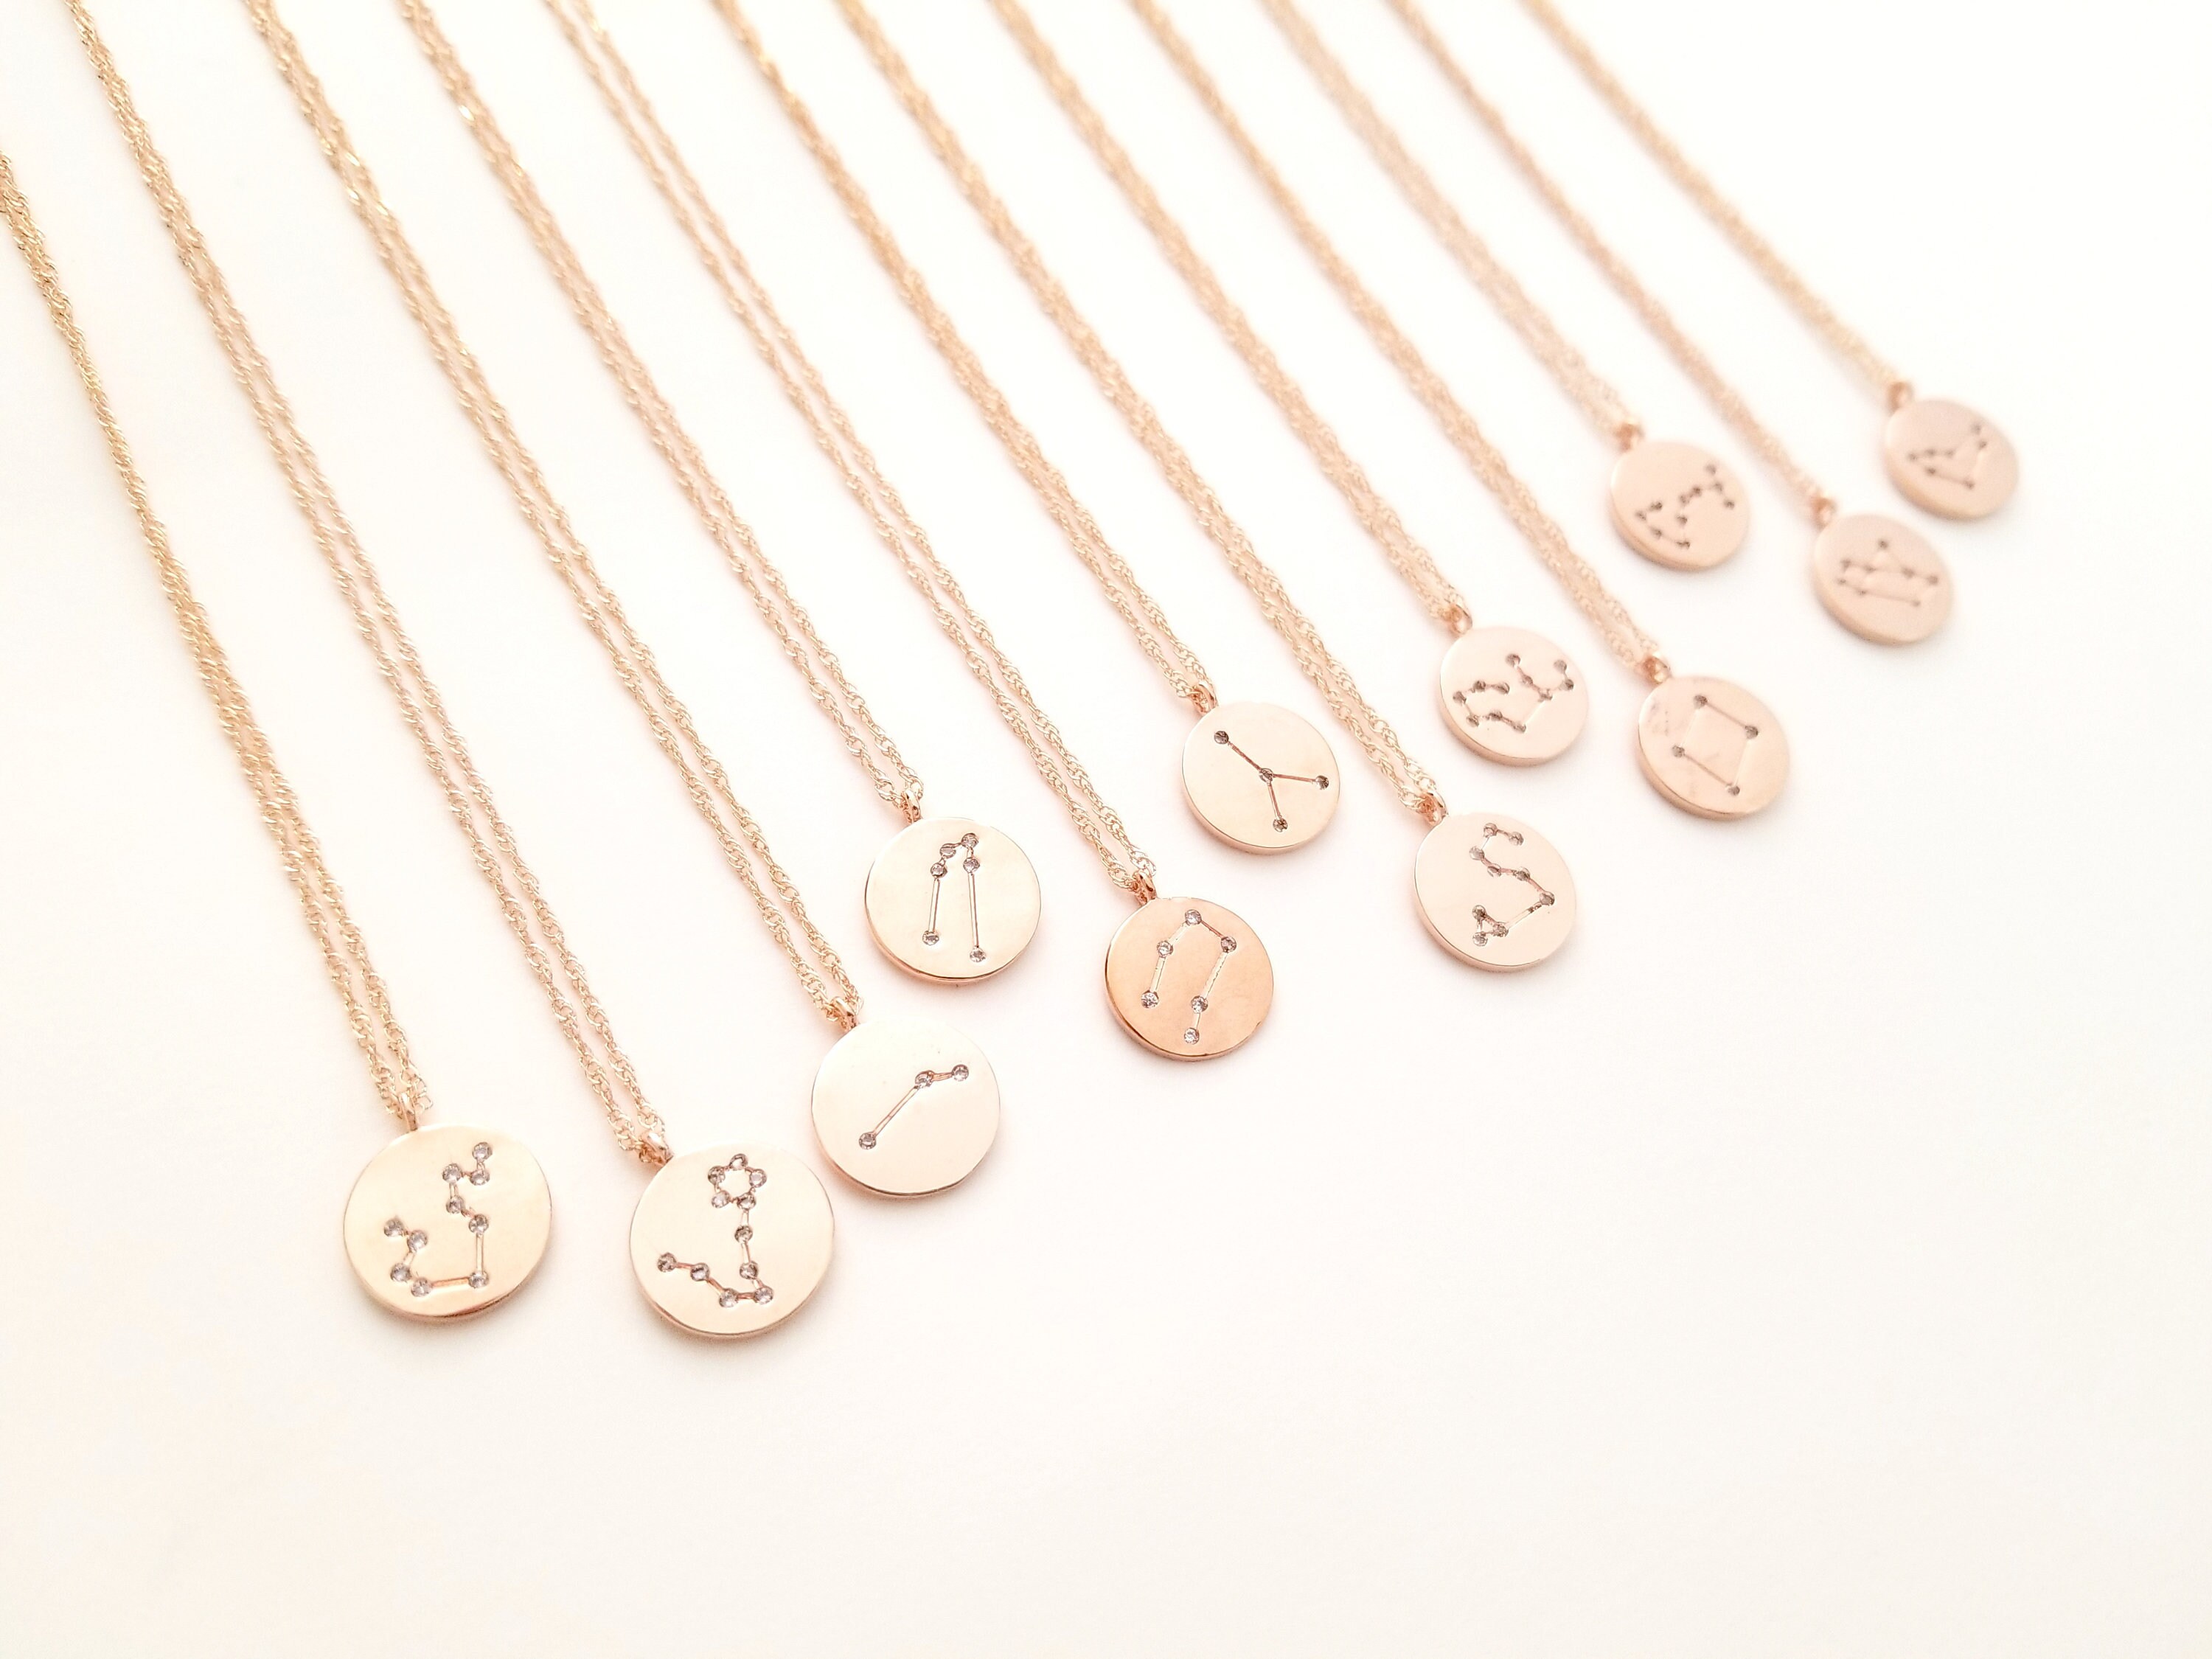 Zodiac Jewelry Celestial Constellation Necklace Gift For Women Gold Disk Necklace, Rose Necklace, Bridesmaid Gift Birthday